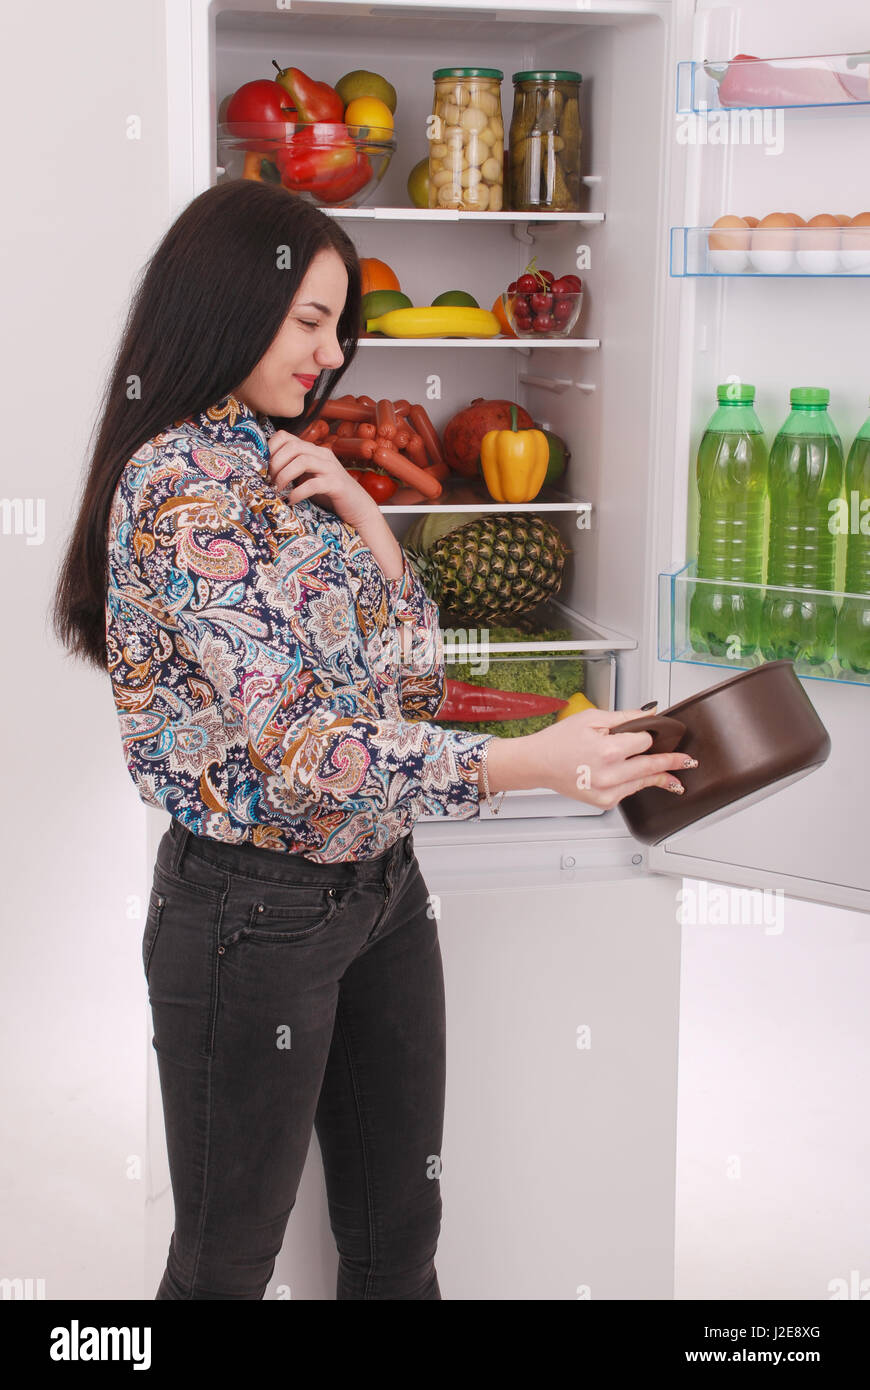 Angry and upset housewife looking into a pot with foul meal. Beautiful young girl near the fridge. Stock Photo